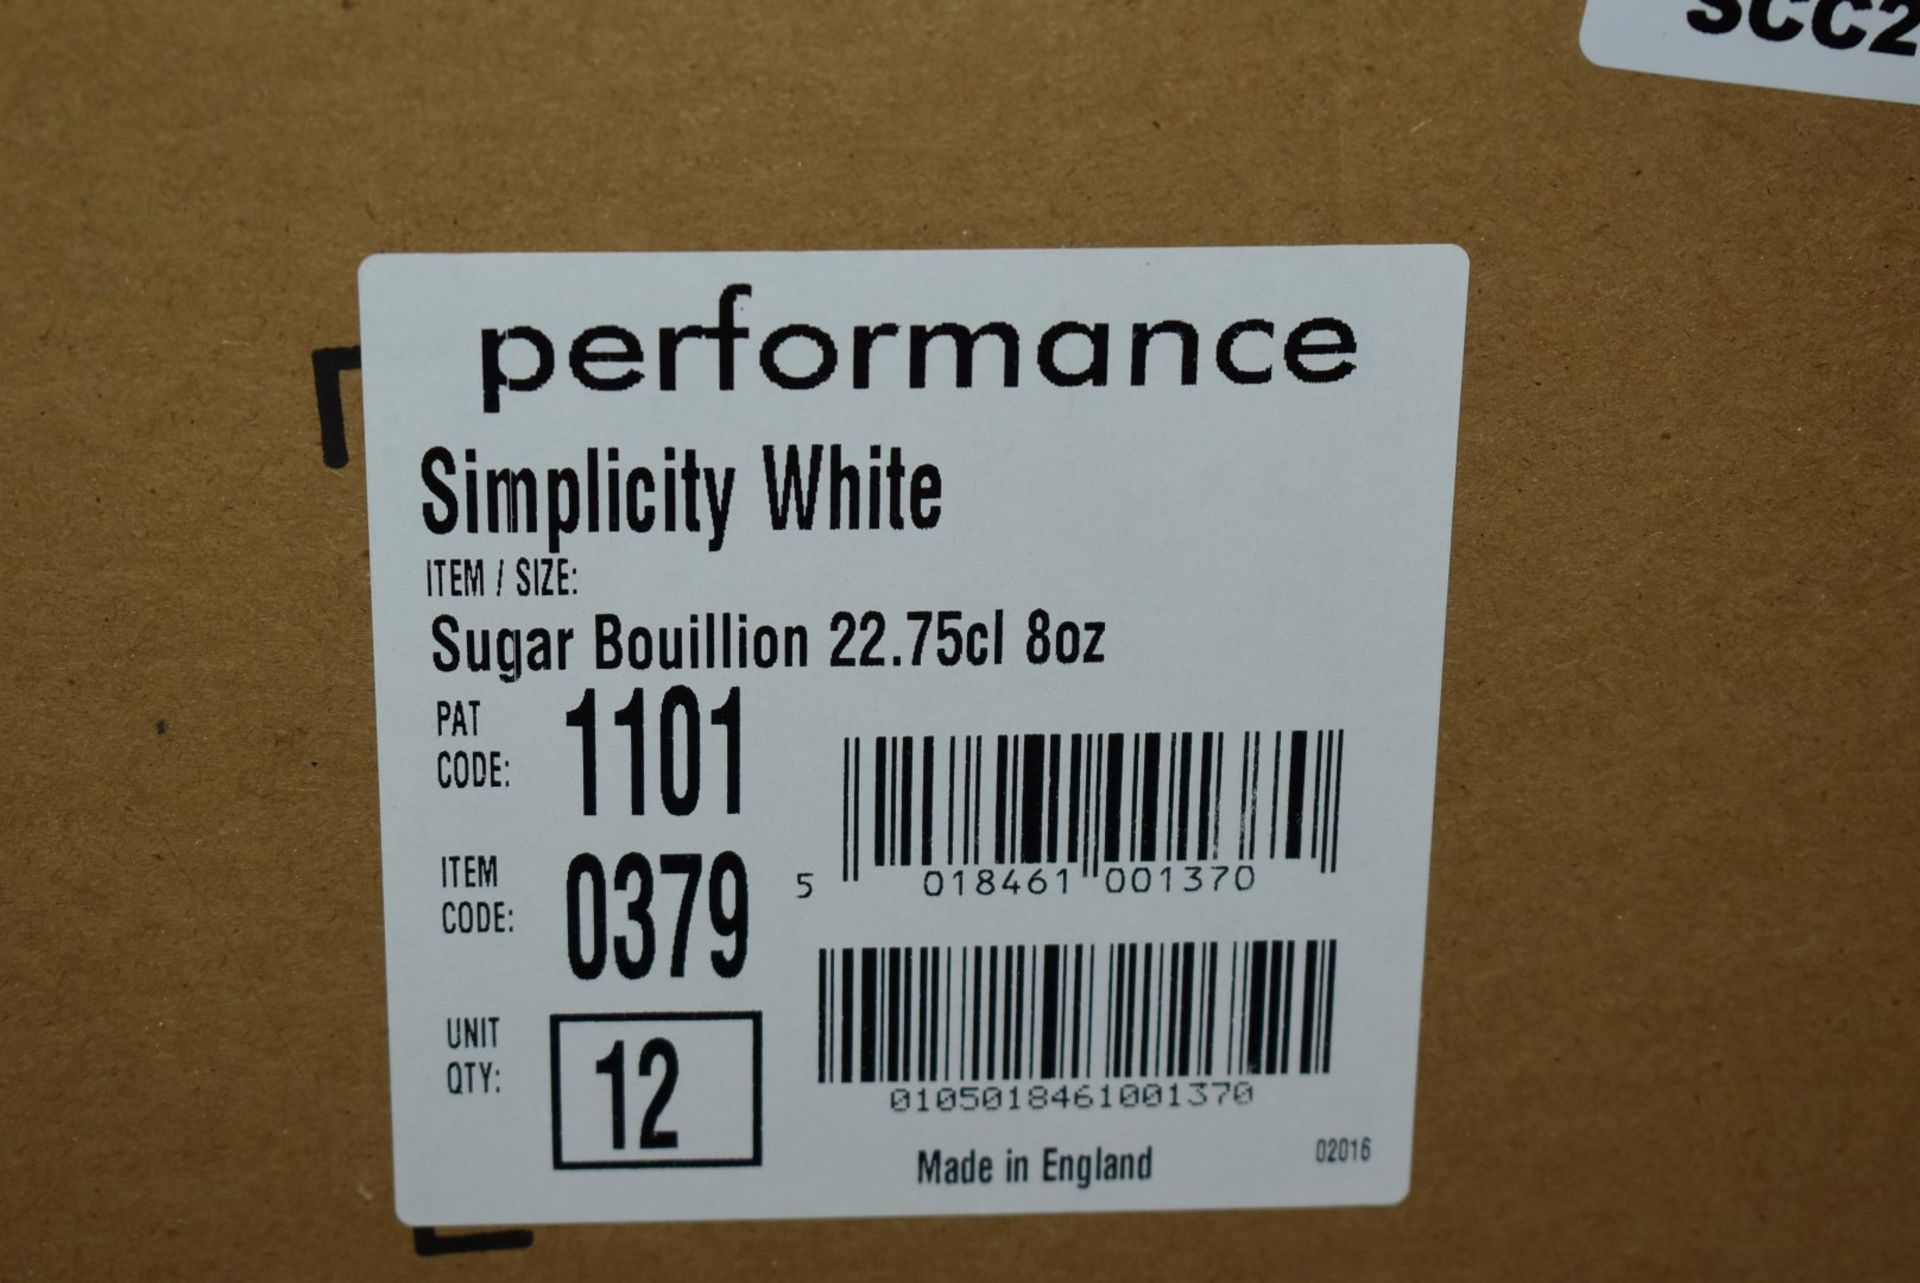 12 x Performance Simplicity White 8oz Sugar Bowls - New and Boxed - Image 2 of 2